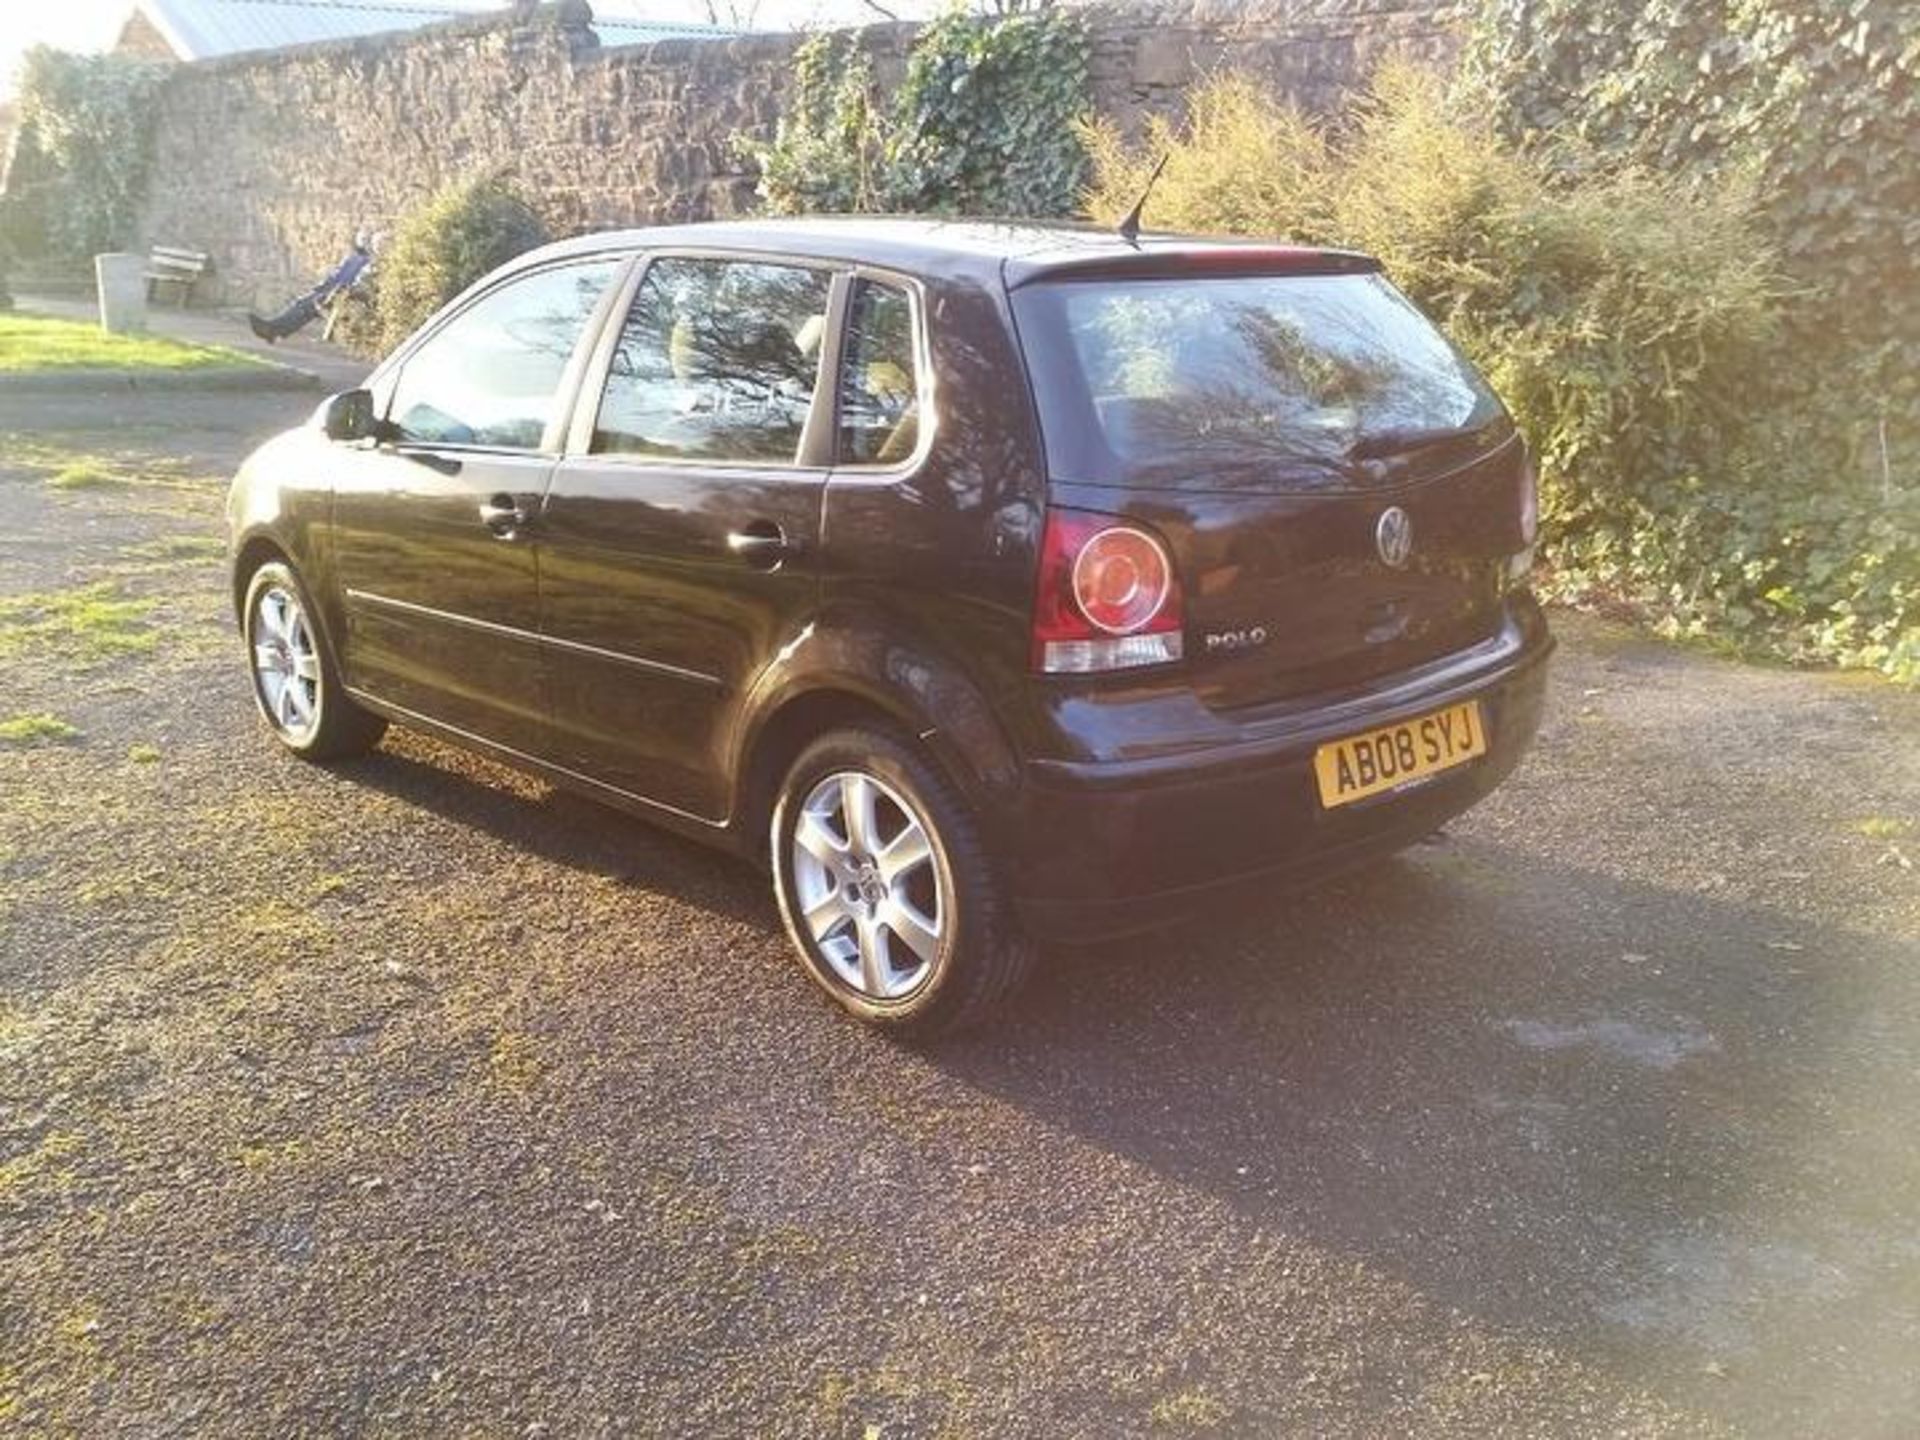 VOLKSWAGEN, POLO 1-2 MATCH, AB08 SYJ, 1-2 LTR, PETROL, MANUAL, 4 DOOR HATCH, 06.06.2008, CURRENT - Image 6 of 16